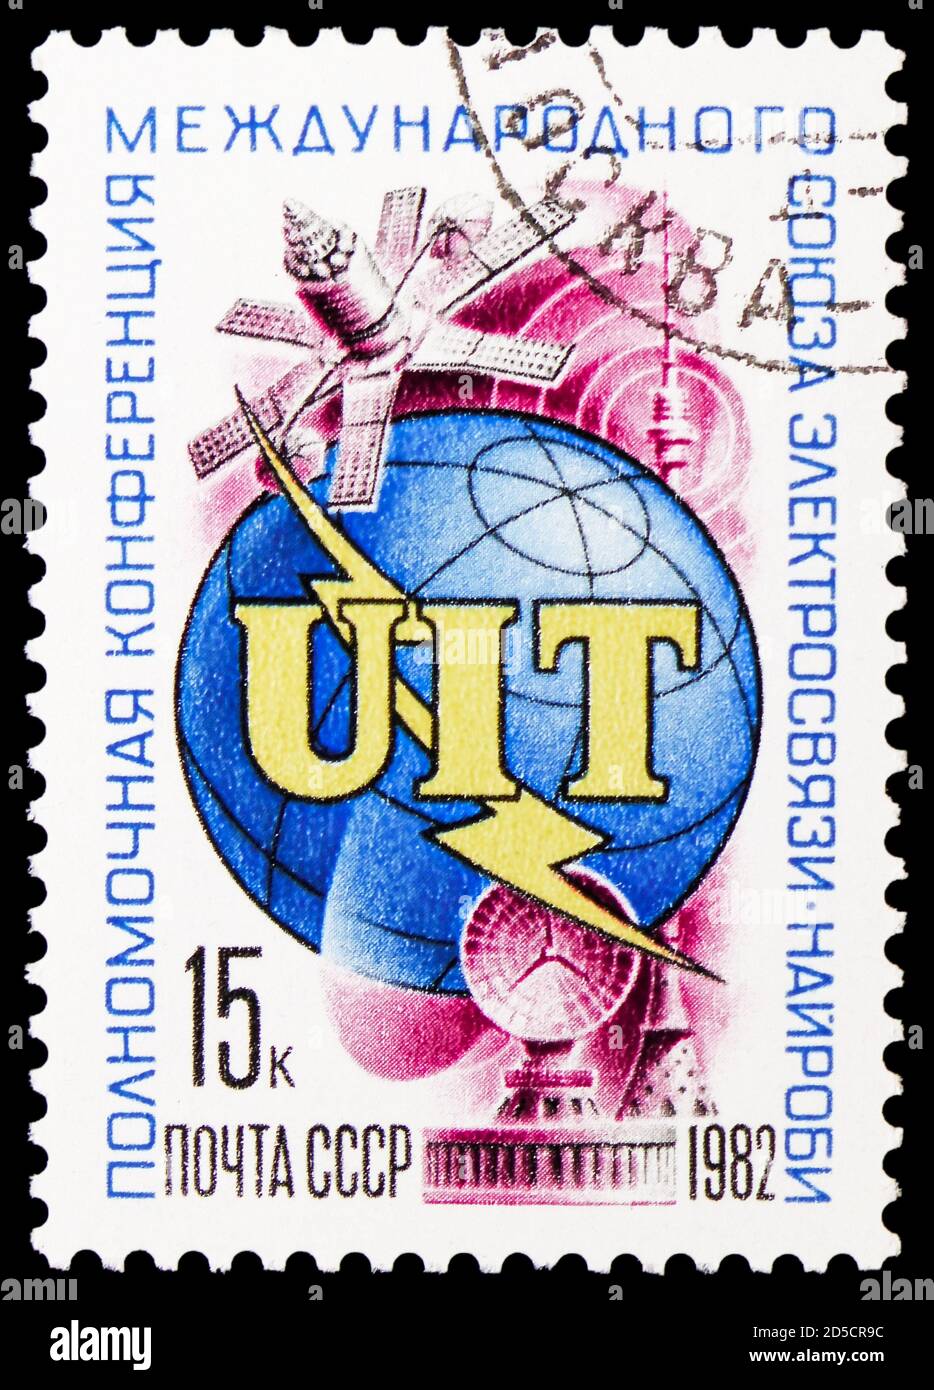 MOSCOW, RUSSIA - SEPTEMBER 28, 2020: Postage stamp printed in Soviet Union devoted to I.T.U. Conference, Nairobi, serie, circa 1982 Stock Photo